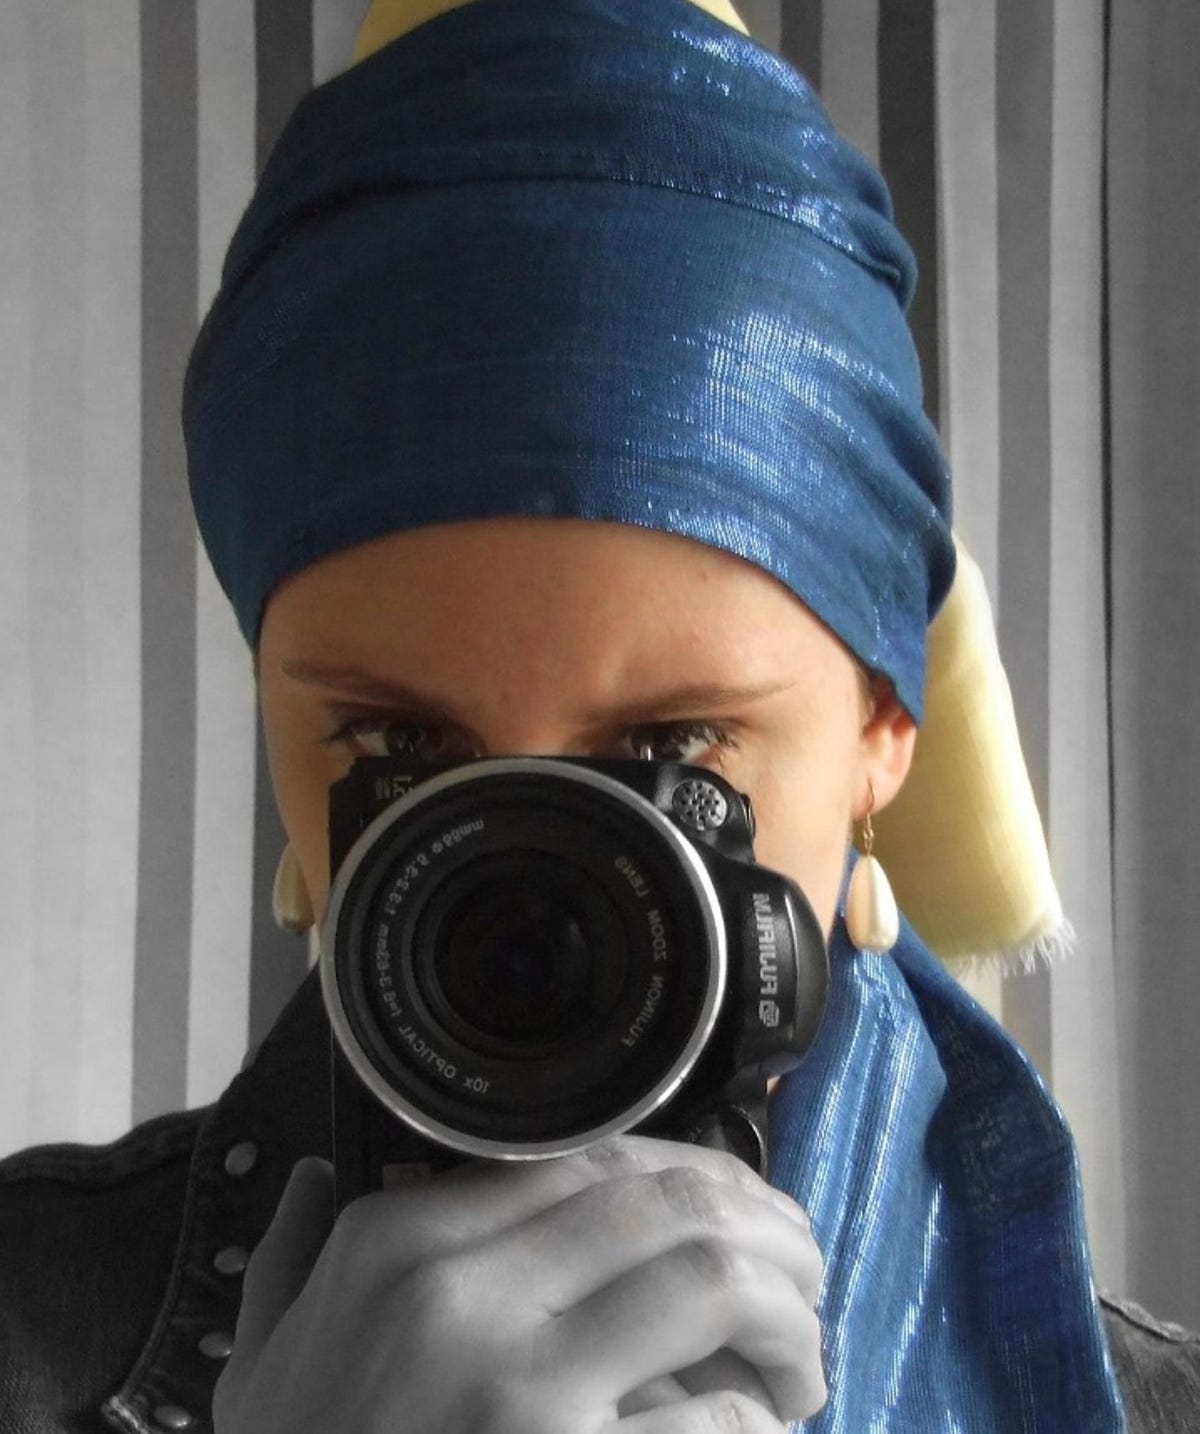 Woman wearing a turban and two pearl earrings while holding a camera